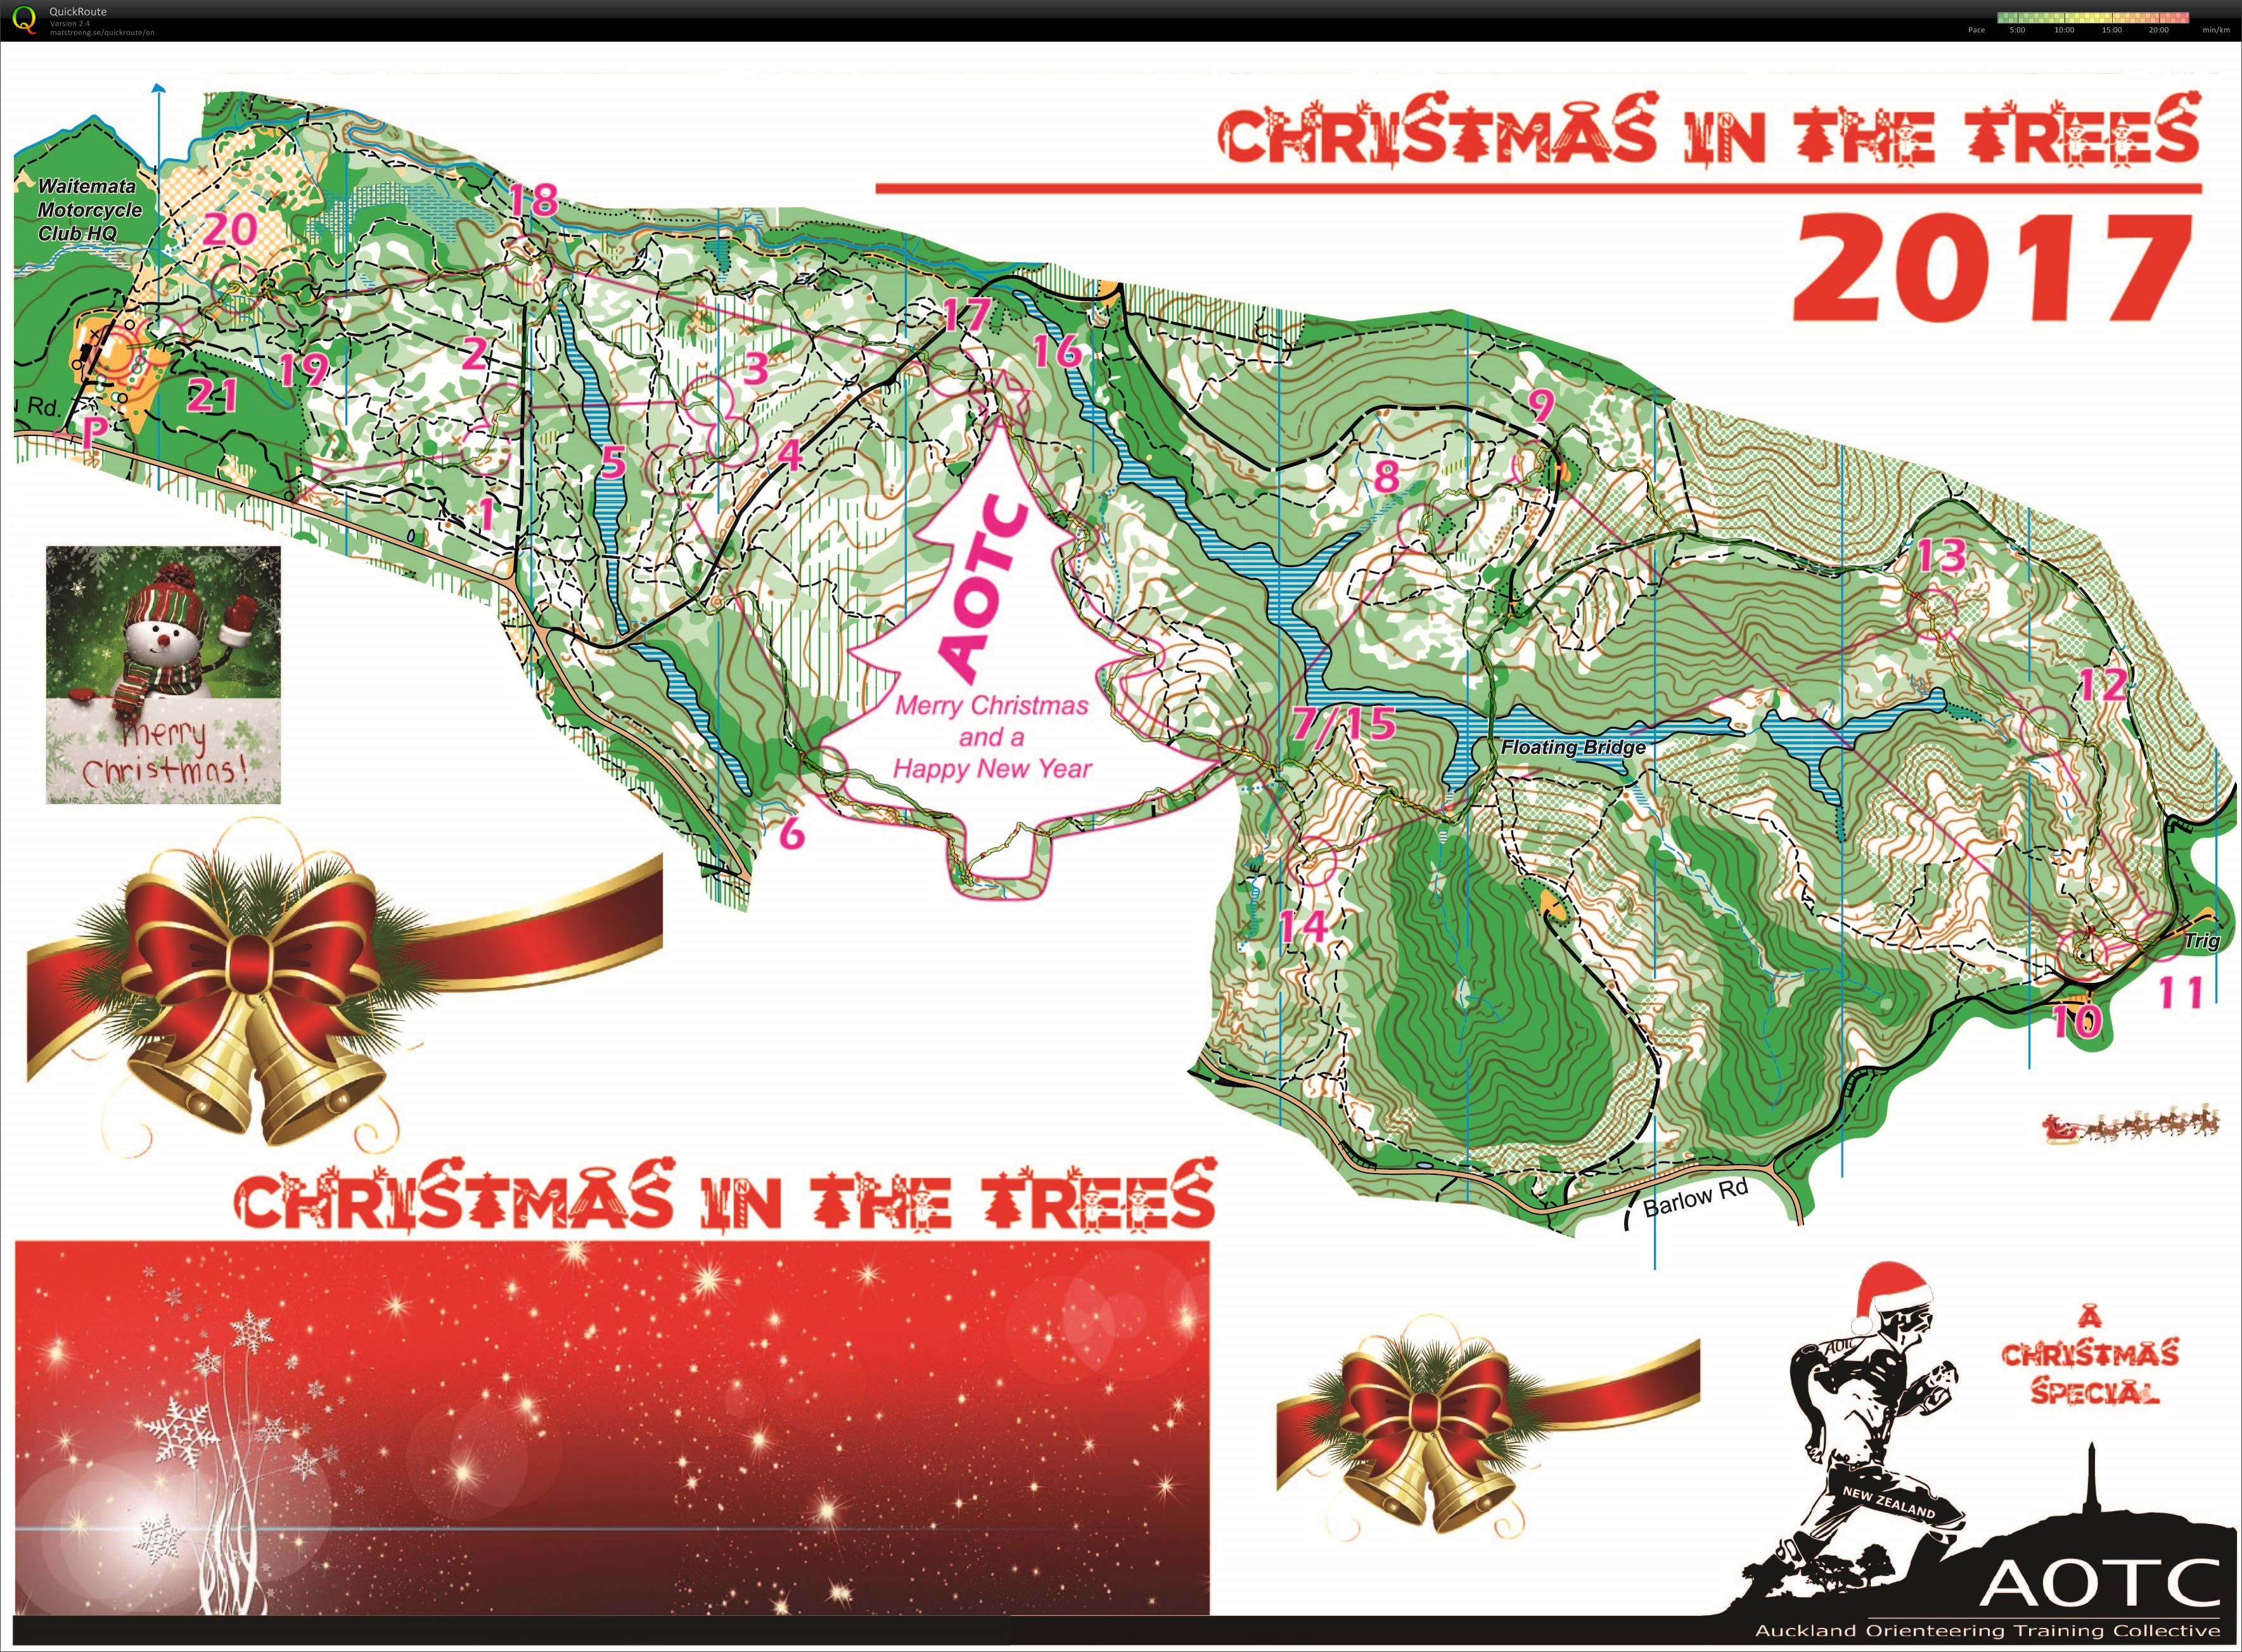 Christmas in the Trees 2017 (16/12/2017)